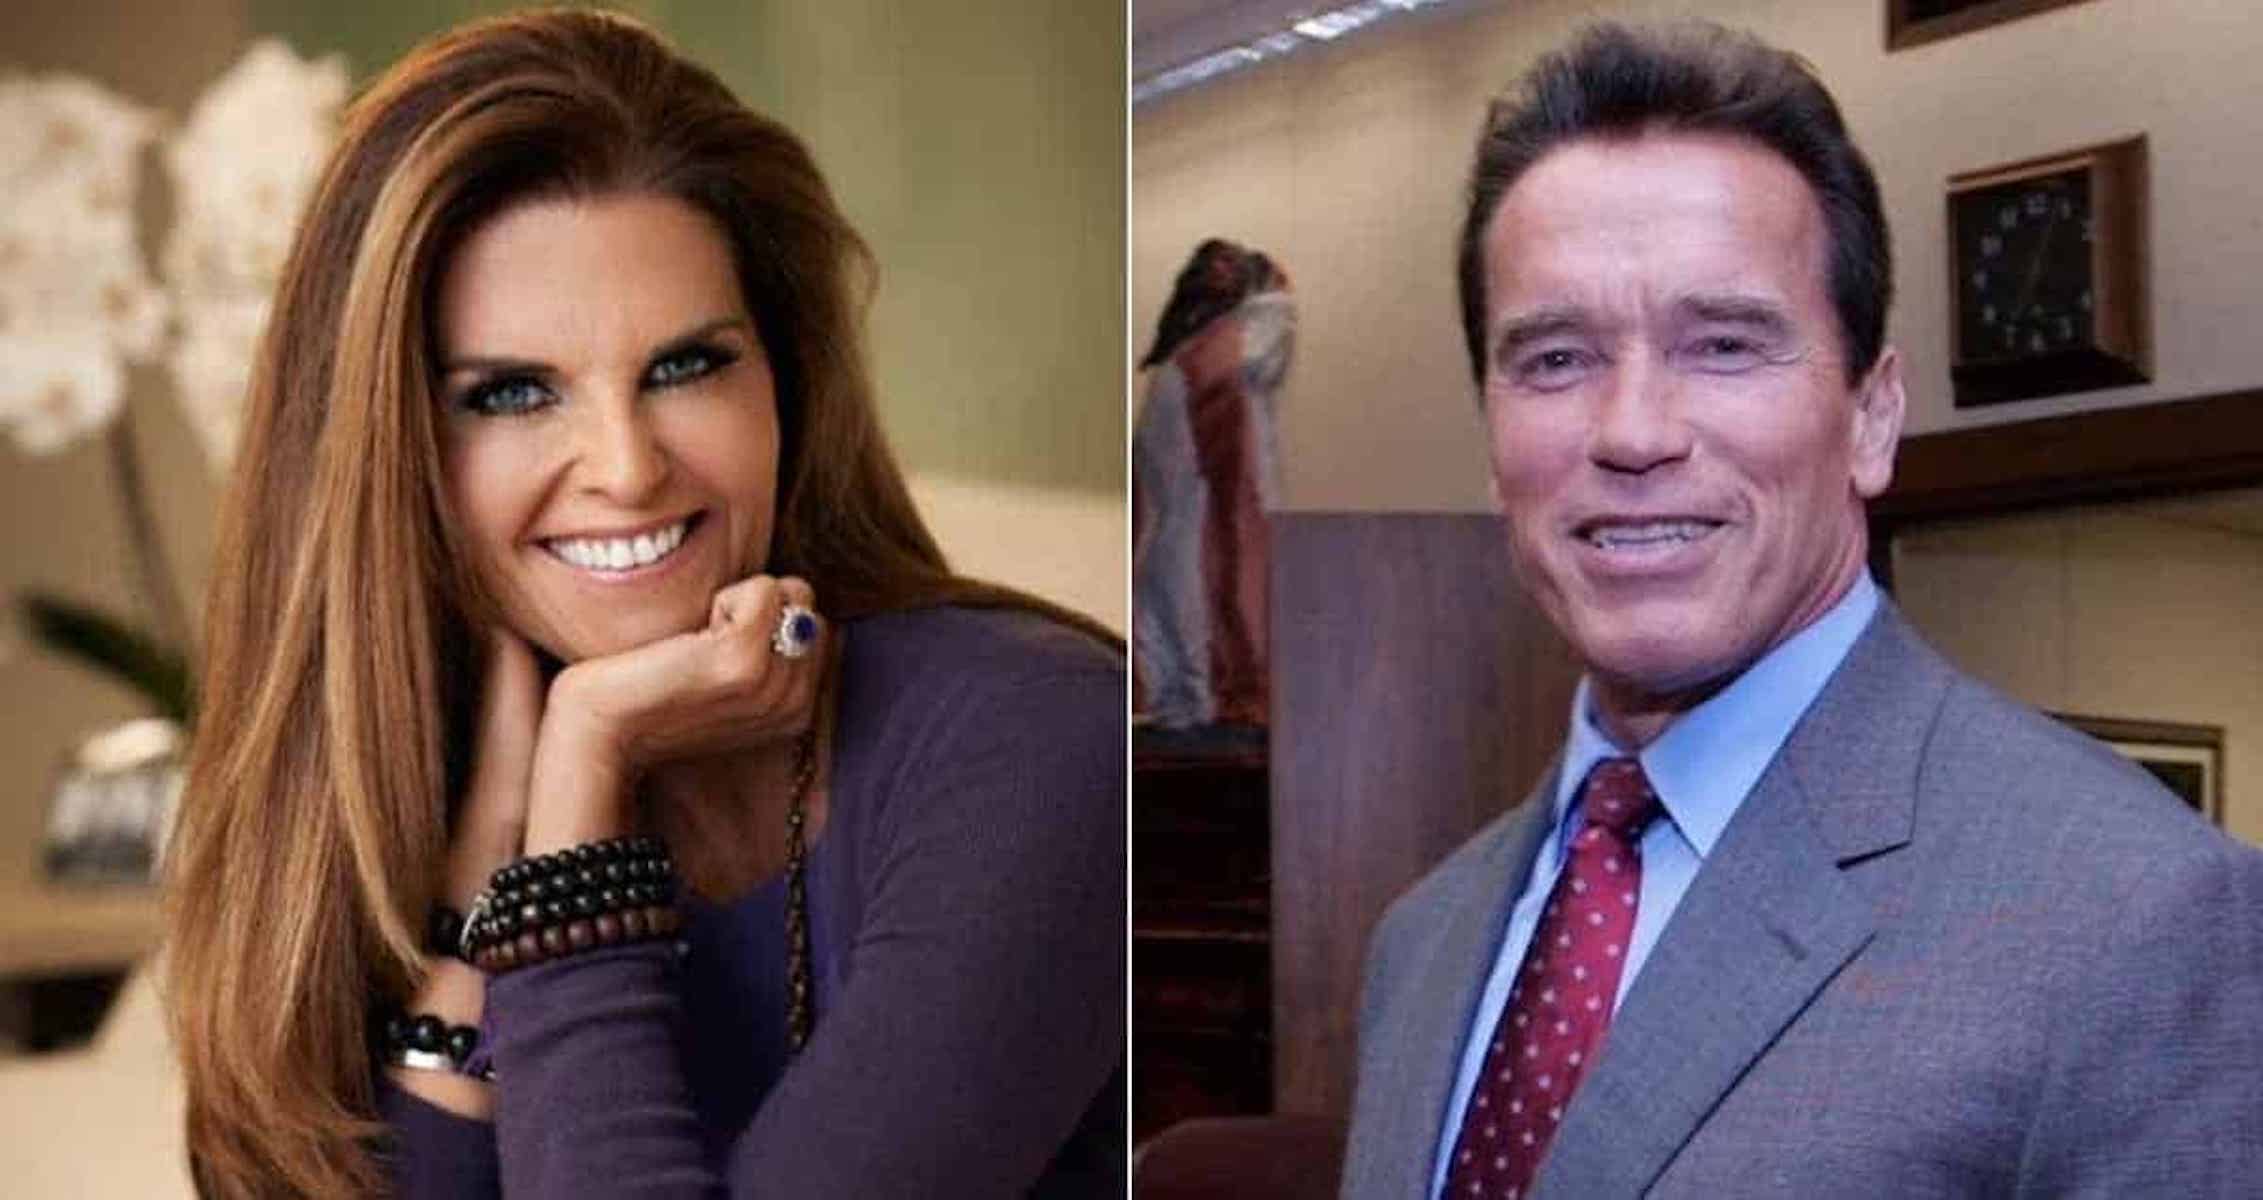 arnold-schwarzenegger-maria-shriver-official-divorced-after-staying-separated-for-10-years-001.jpg